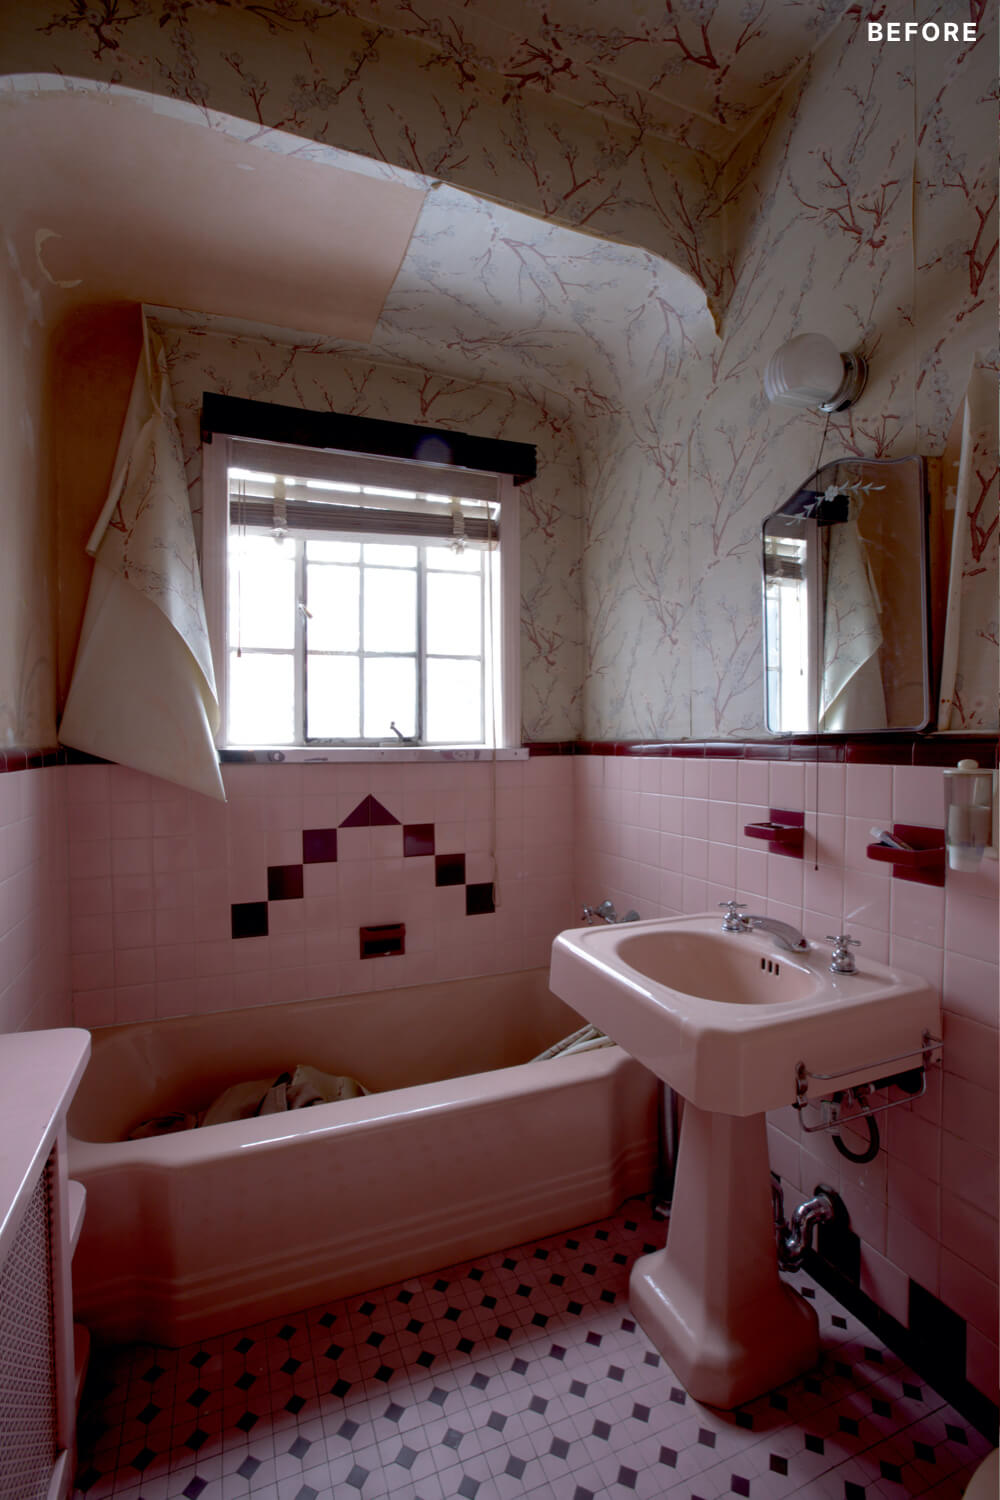 Pink bathroom with pink bathtub and pink pedestal along with pink wall paper before renovation